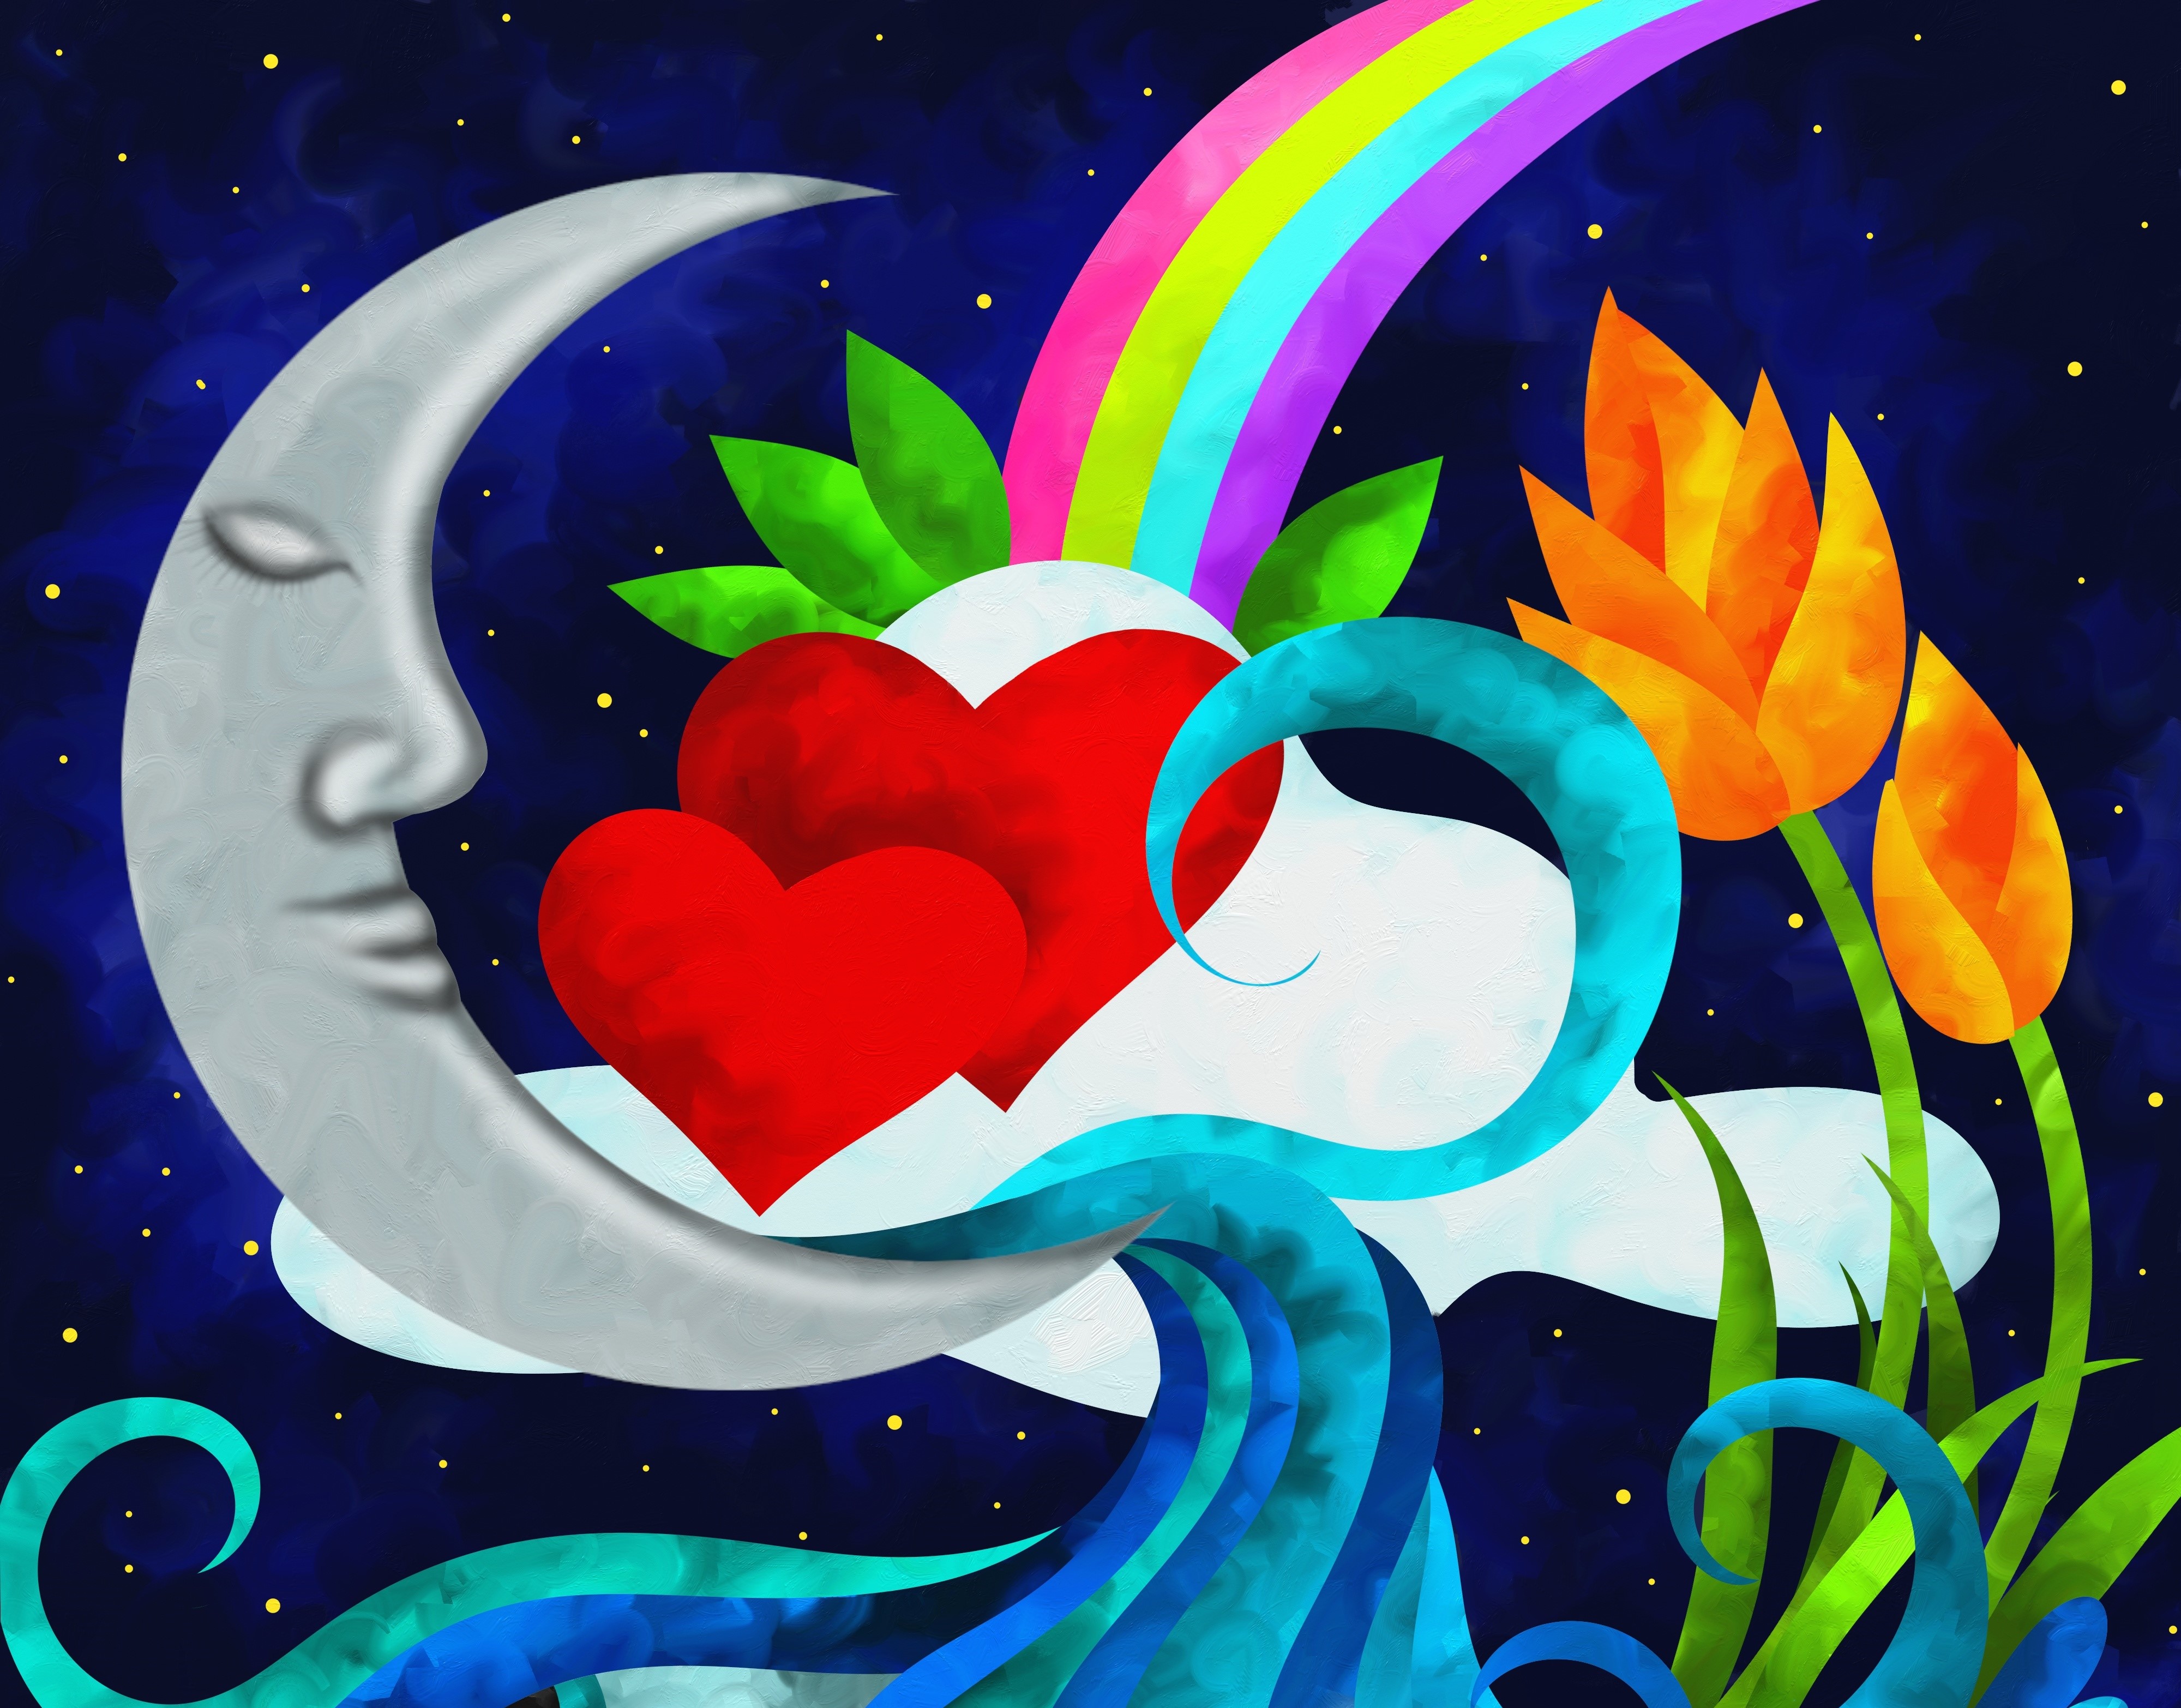 Love & the Potent New Moon in Taurus